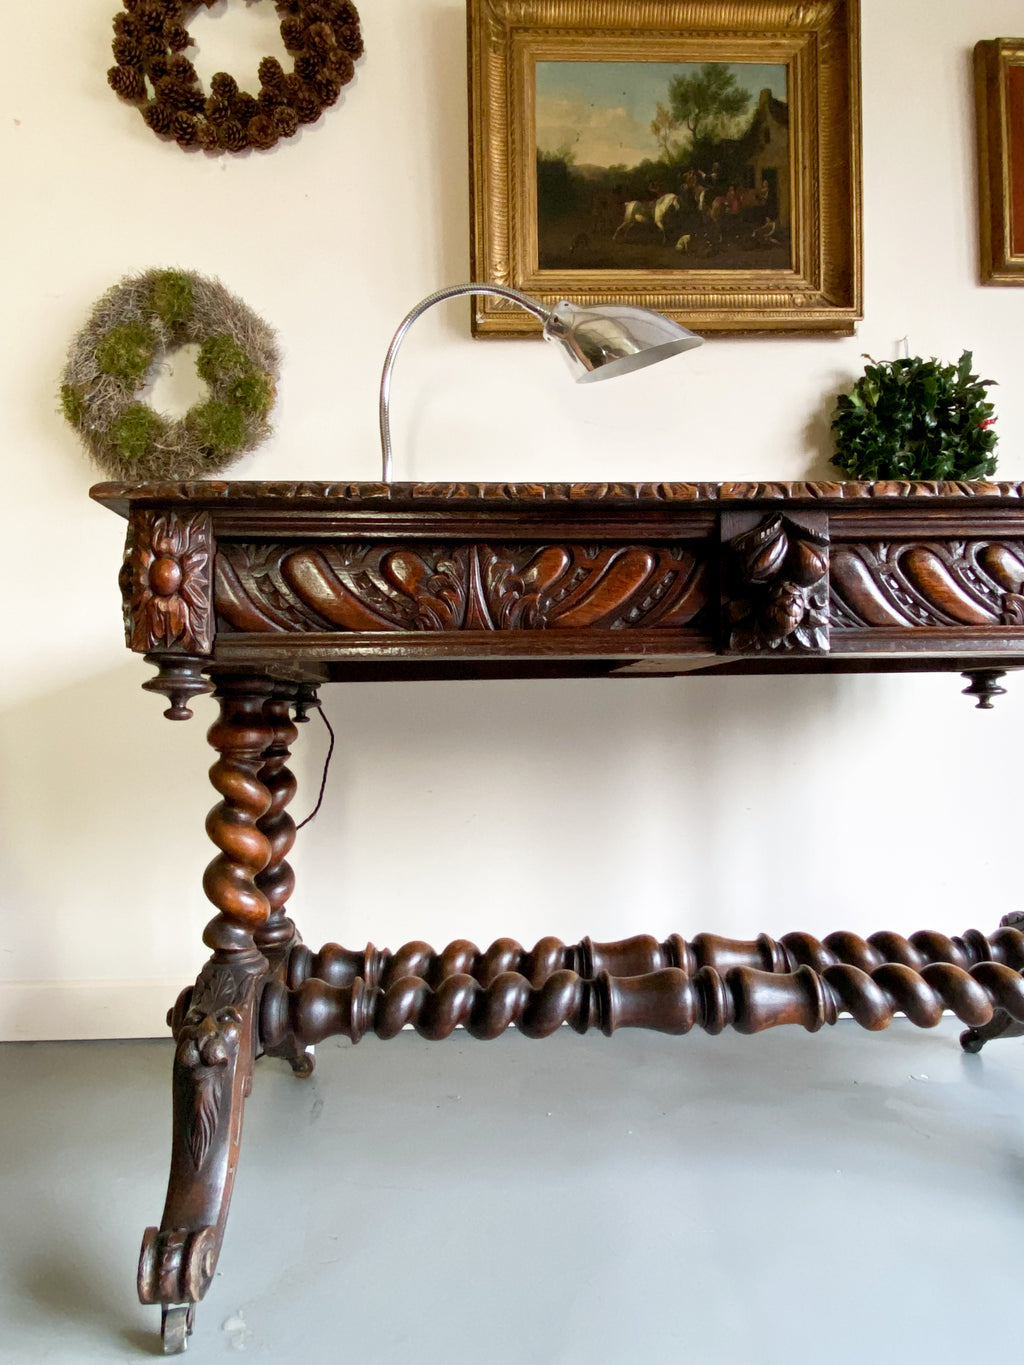 A 19th Century Jacobean Revival Library Table